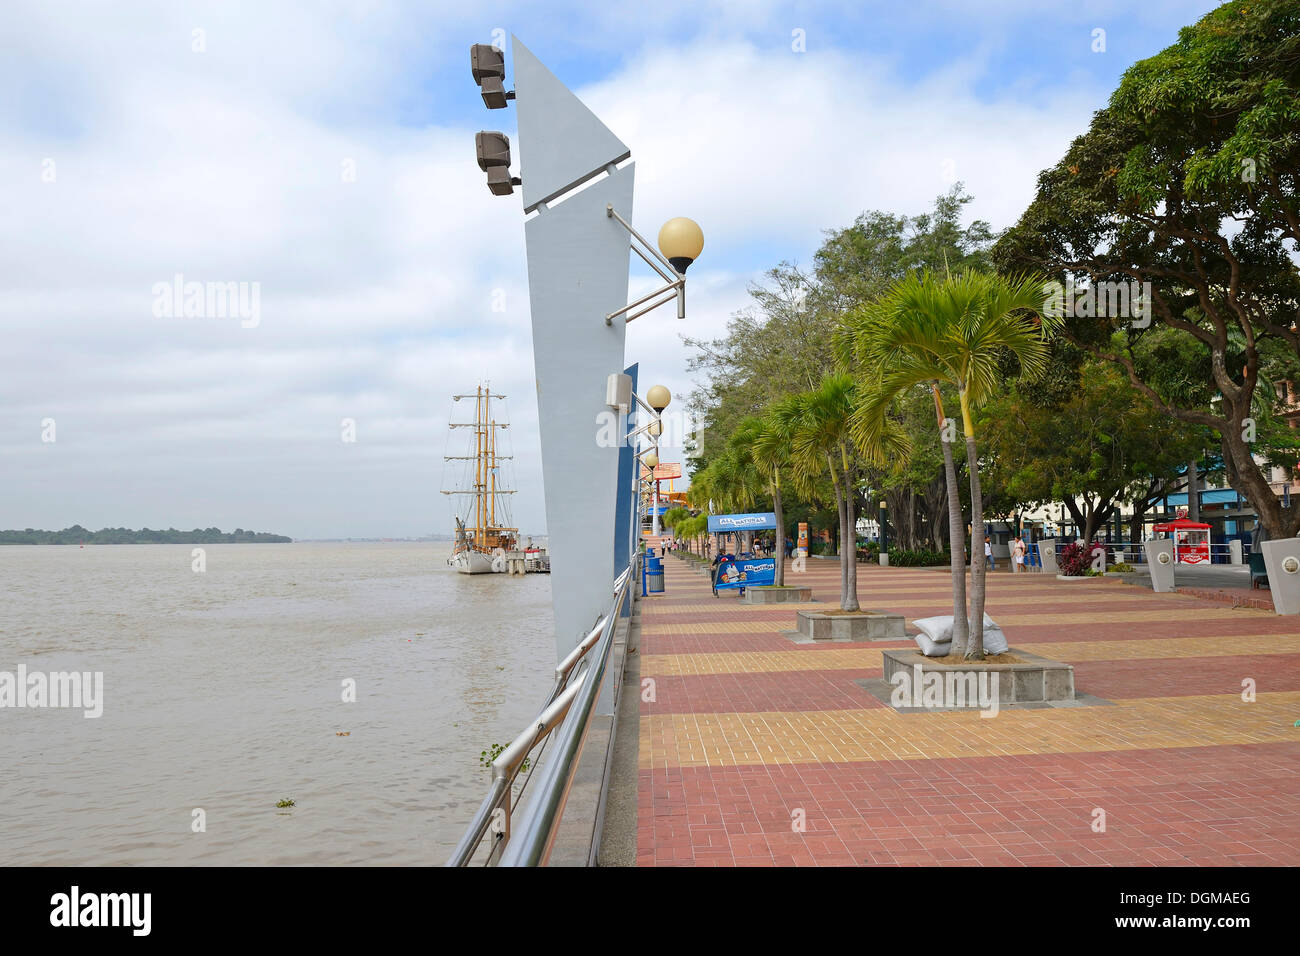 Overlooking the waterfront promenade of Malecon Park on the bank of the Rio Guayas River, Guayaquil, Ecuador, South America Stock Photo